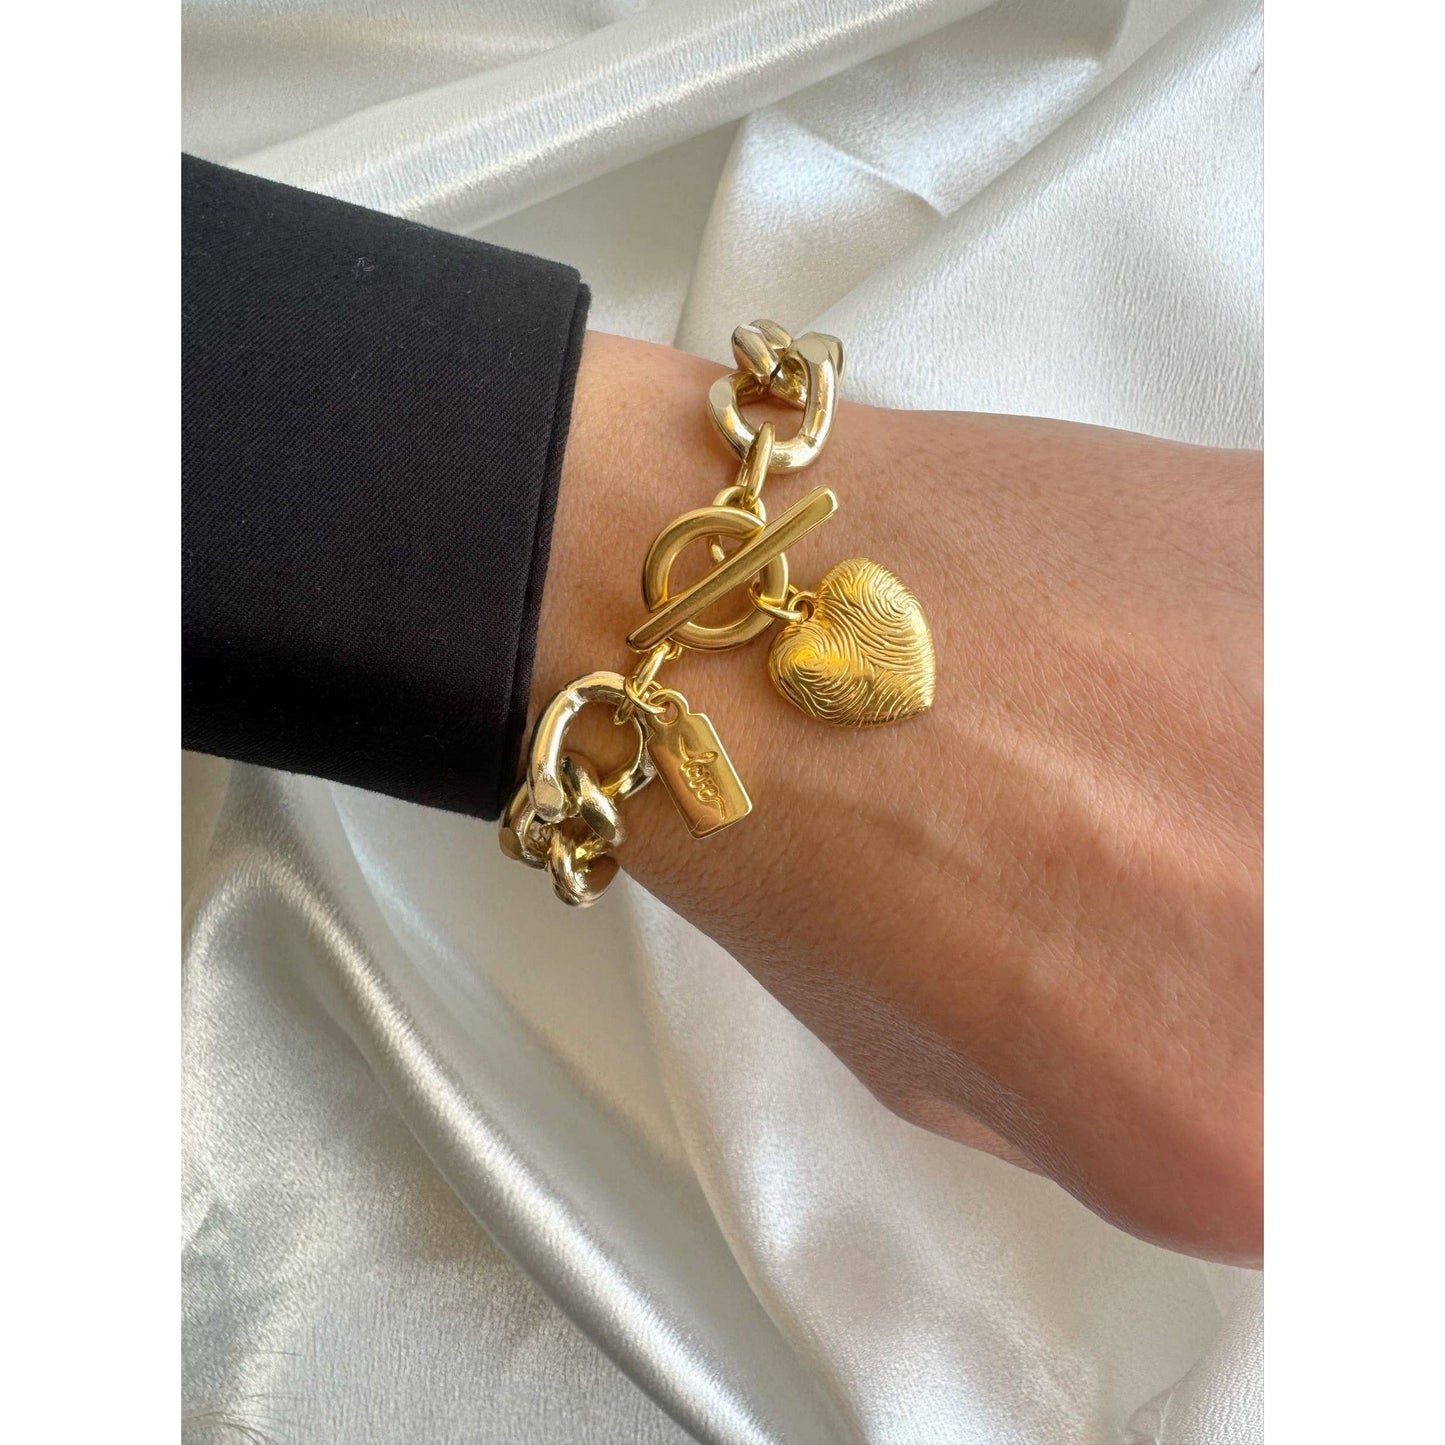 Etched Fingerprint Gold Chunky Chain Bracelet with Heart Charm | Handmade in Athens, Greece